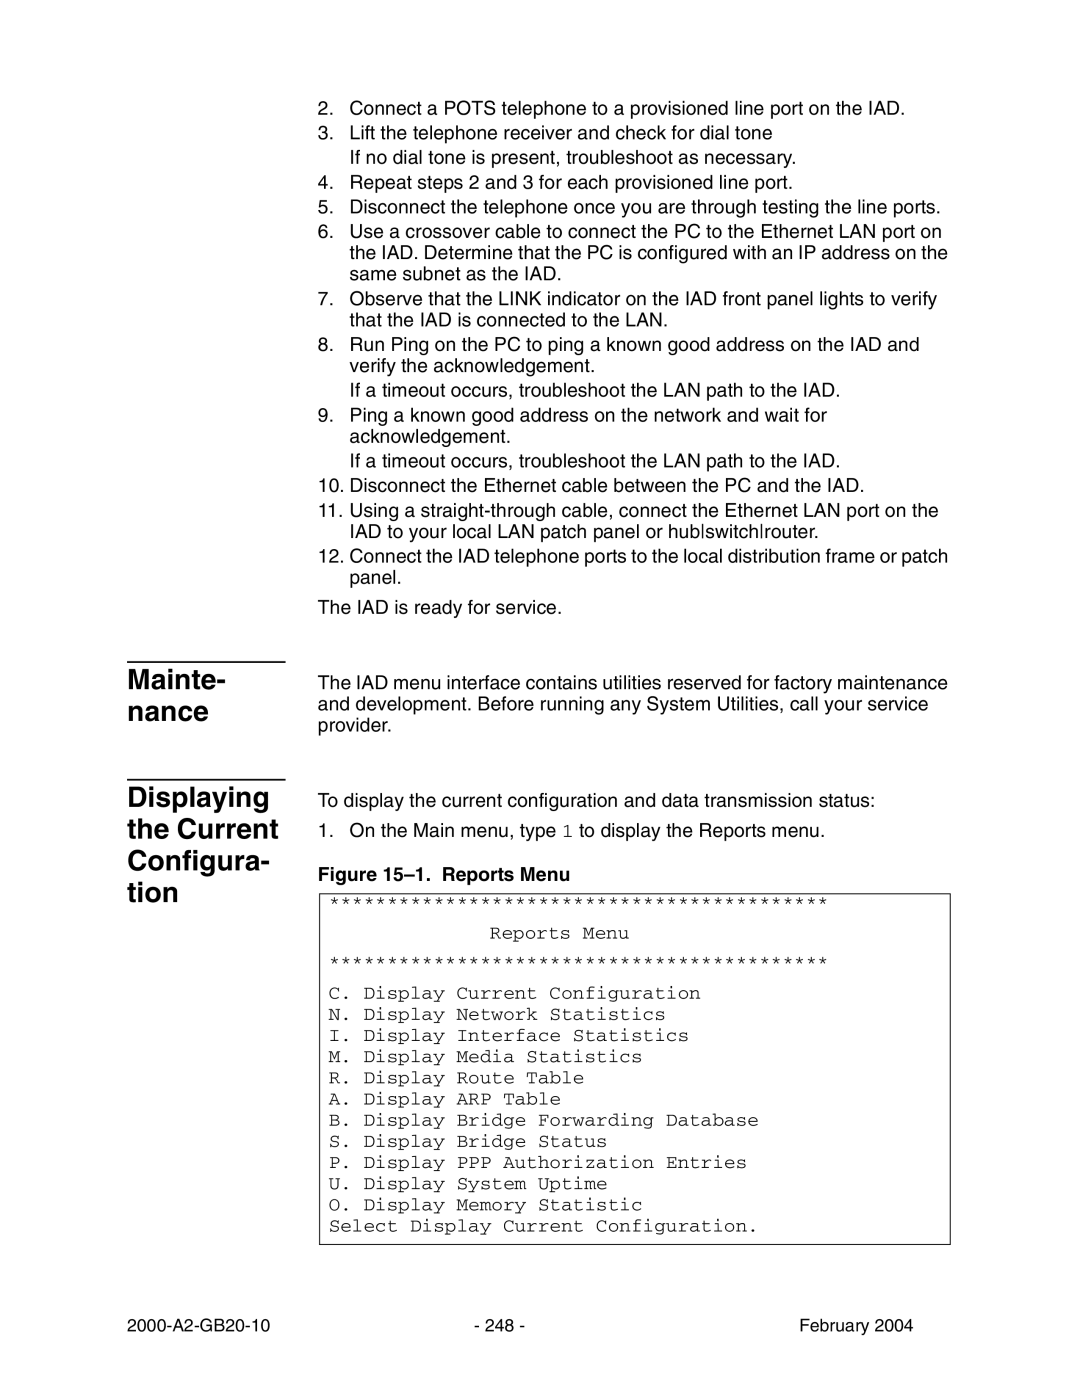 Paradyne JetFusion Integrated Access Device manual Mainte- nance Displaying the Current Configura- tion, Reports Menu 